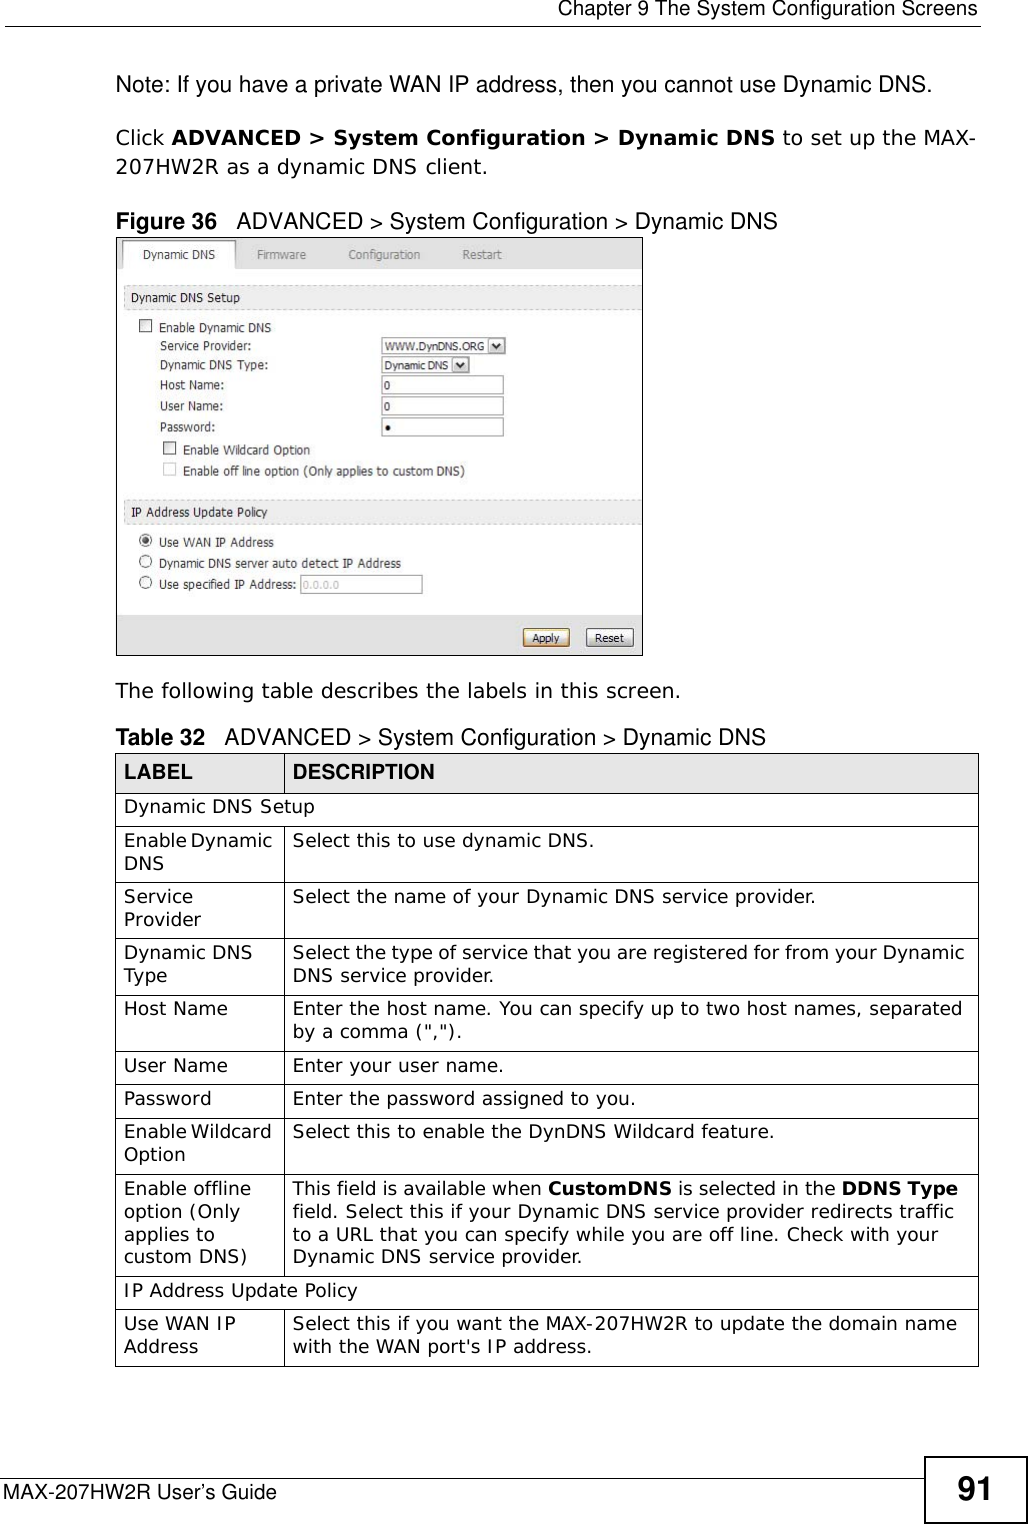  Chapter 9 The System Configuration ScreensMAX-207HW2R User’s Guide 91Note: If you have a private WAN IP address, then you cannot use Dynamic DNS.Click ADVANCED &gt; System Configuration &gt; Dynamic DNS to set up the MAX-207HW2R as a dynamic DNS client.Figure 36   ADVANCED &gt; System Configuration &gt; Dynamic DNSThe following table describes the labels in this screen.Table 32   ADVANCED &gt; System Configuration &gt; Dynamic DNSLABEL DESCRIPTIONDynamic DNS SetupEnable Dynamic DNS Select this to use dynamic DNS.Service Provider Select the name of your Dynamic DNS service provider.Dynamic DNS Type  Select the type of service that you are registered for from your Dynamic DNS service provider.Host Name  Enter the host name. You can specify up to two host names, separated by a comma (&quot;,&quot;).User Name Enter your user name.Password  Enter the password assigned to you.Enable Wildcard Option Select this to enable the DynDNS Wildcard feature.Enable offline option (Only applies to custom DNS)This field is available when CustomDNS is selected in the DDNS Type  field. Select this if your Dynamic DNS service provider redirects traffic to a URL that you can specify while you are off line. Check with your Dynamic DNS service provider.IP Address Update PolicyUse WAN IP Address  Select this if you want the MAX-207HW2R to update the domain name with the WAN port&apos;s IP address.